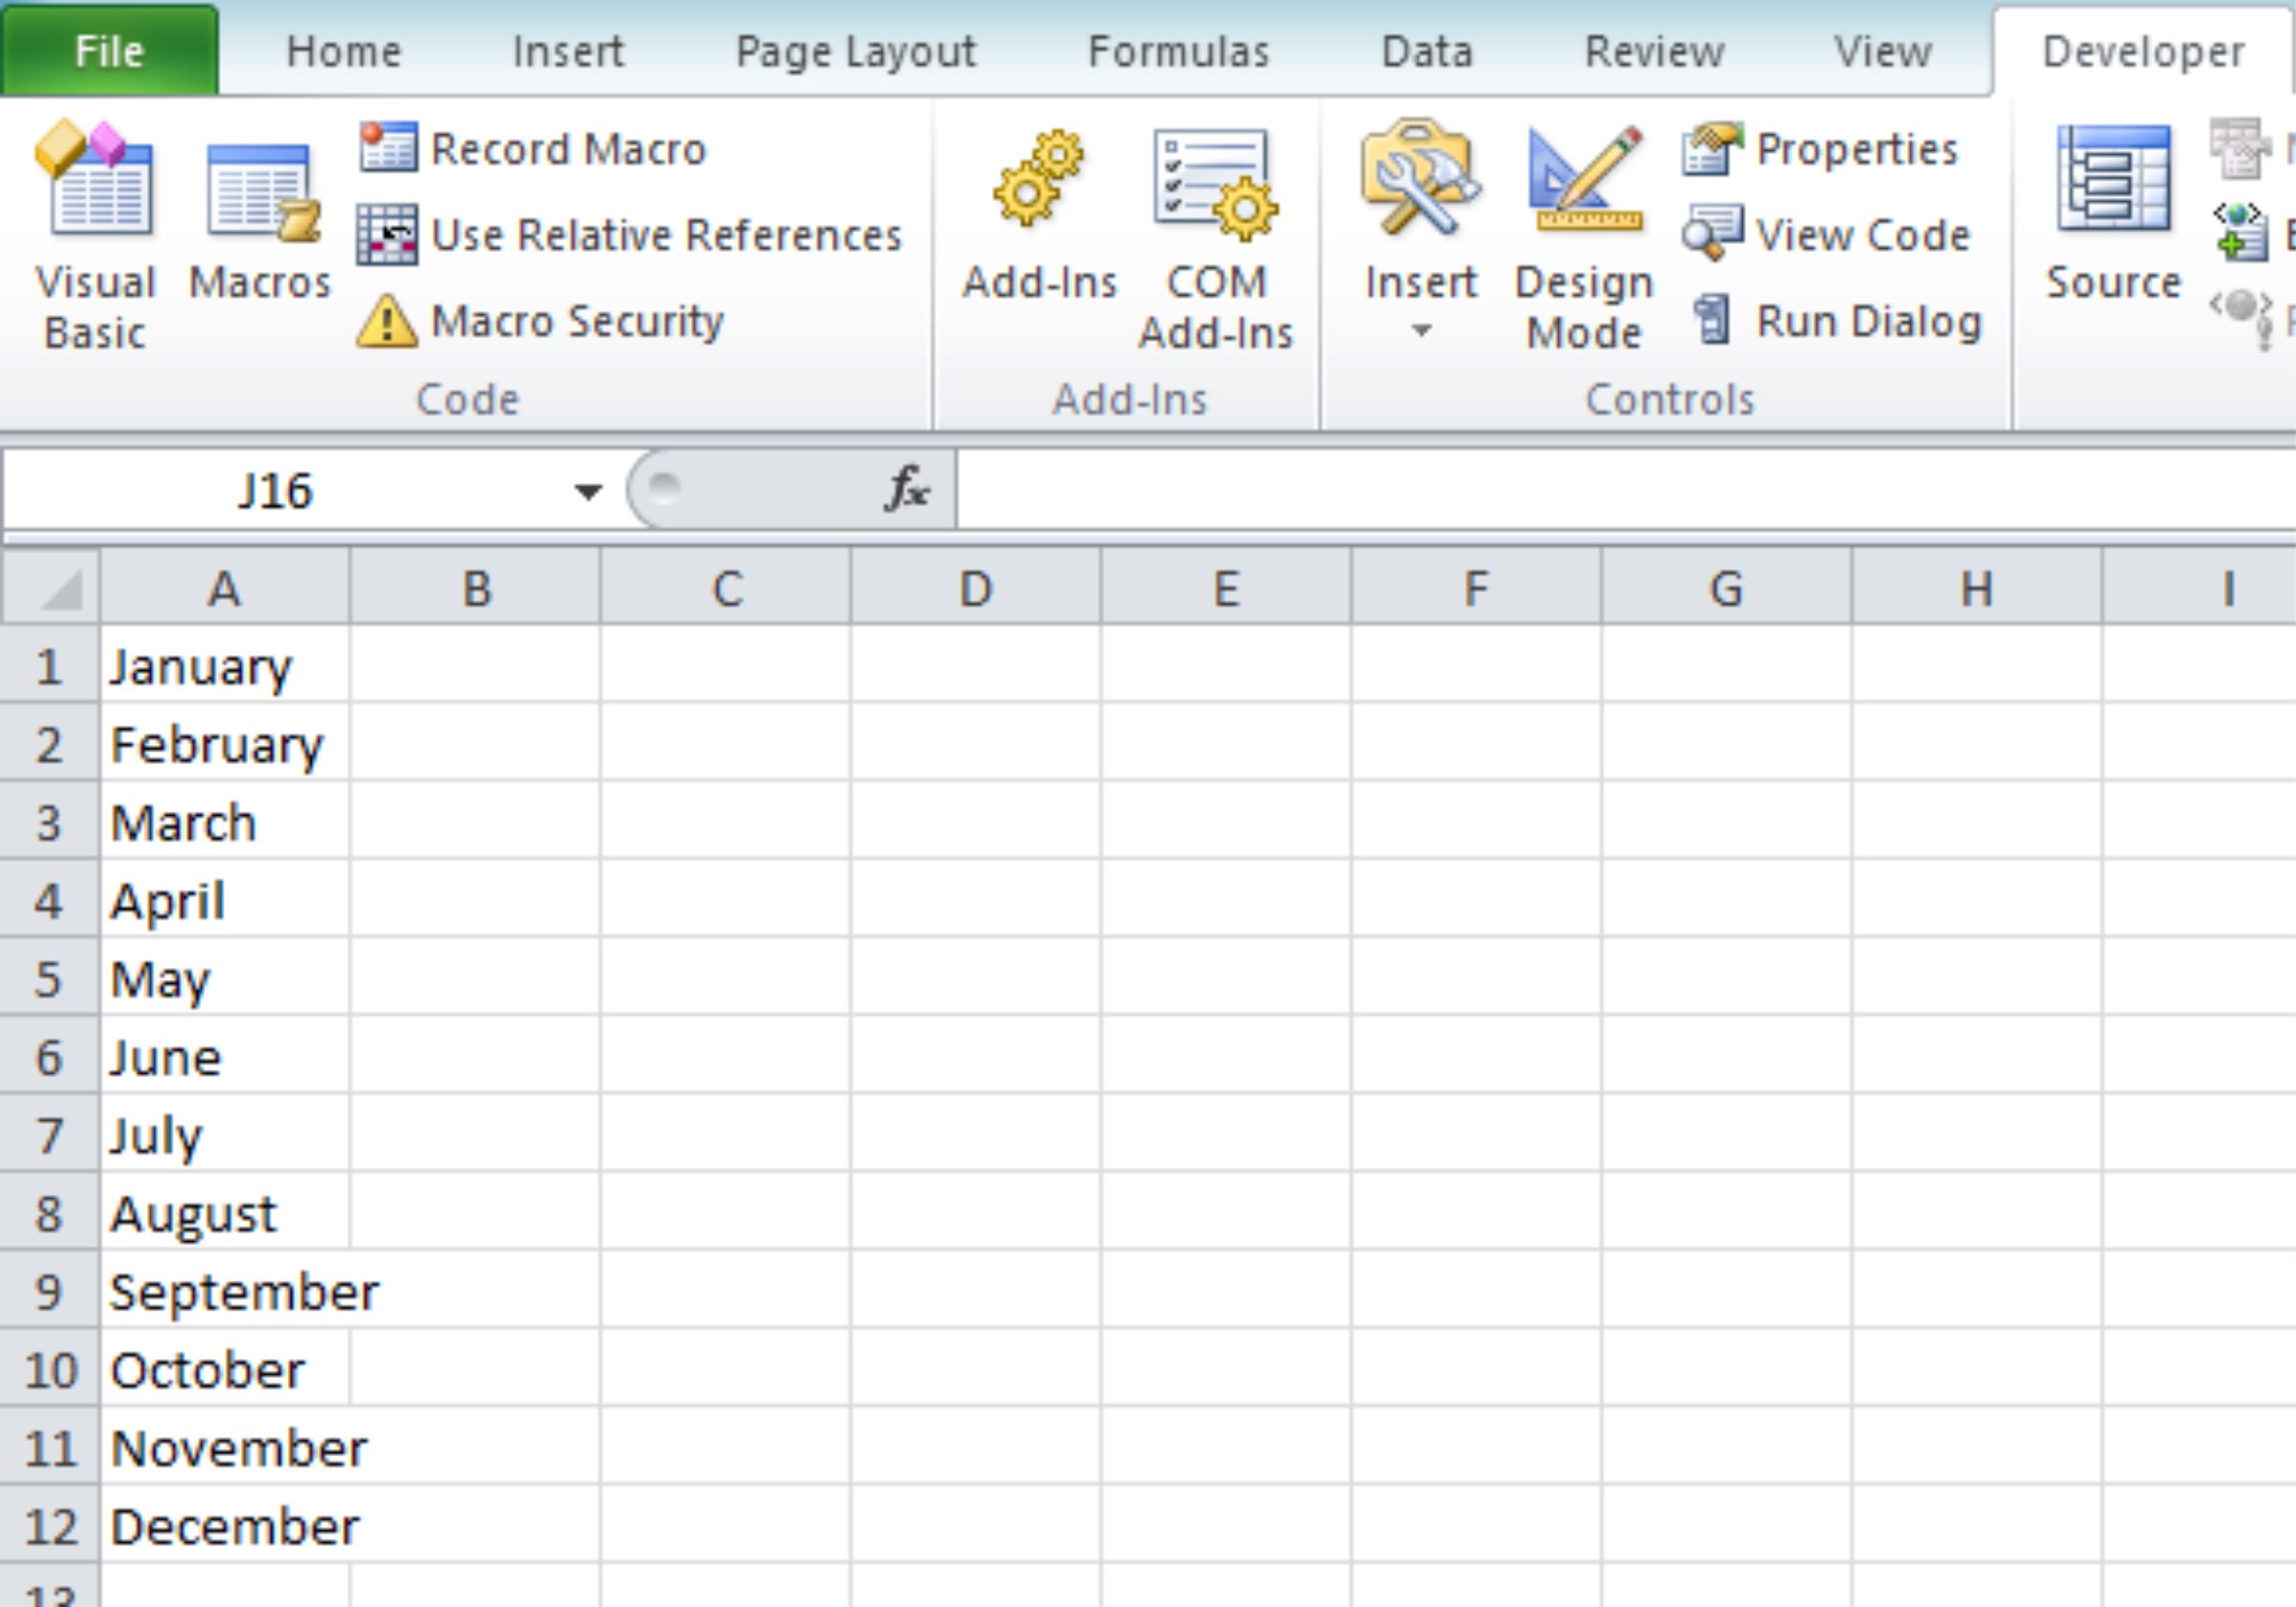 how-to-record-a-macro-in-excel-2010-tutorials-tree-learn-photoshop-excel-word-powerpoint